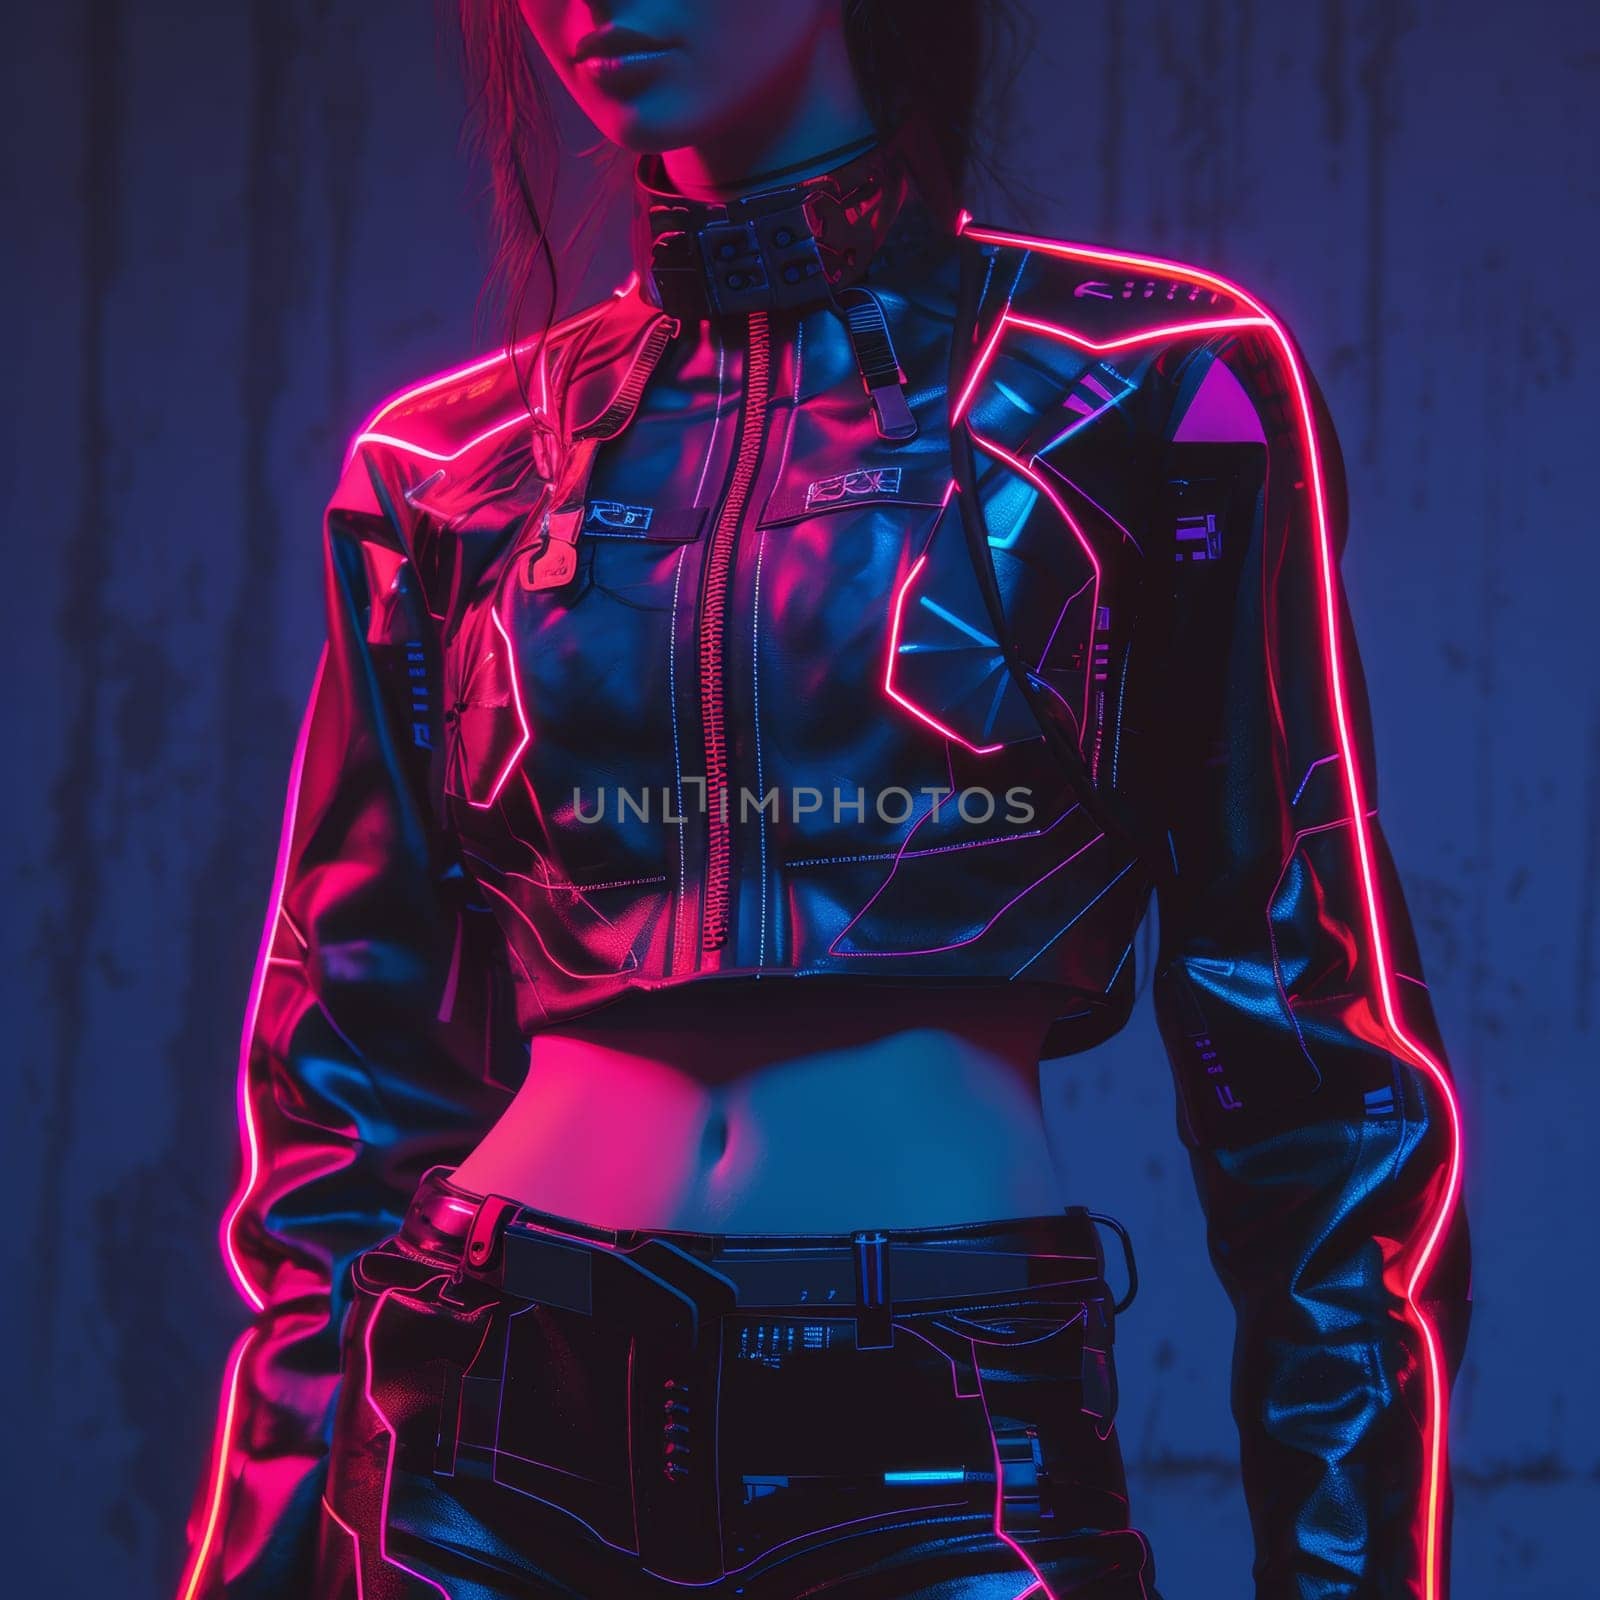 A woman in a futuristic outfit with neon lights on her